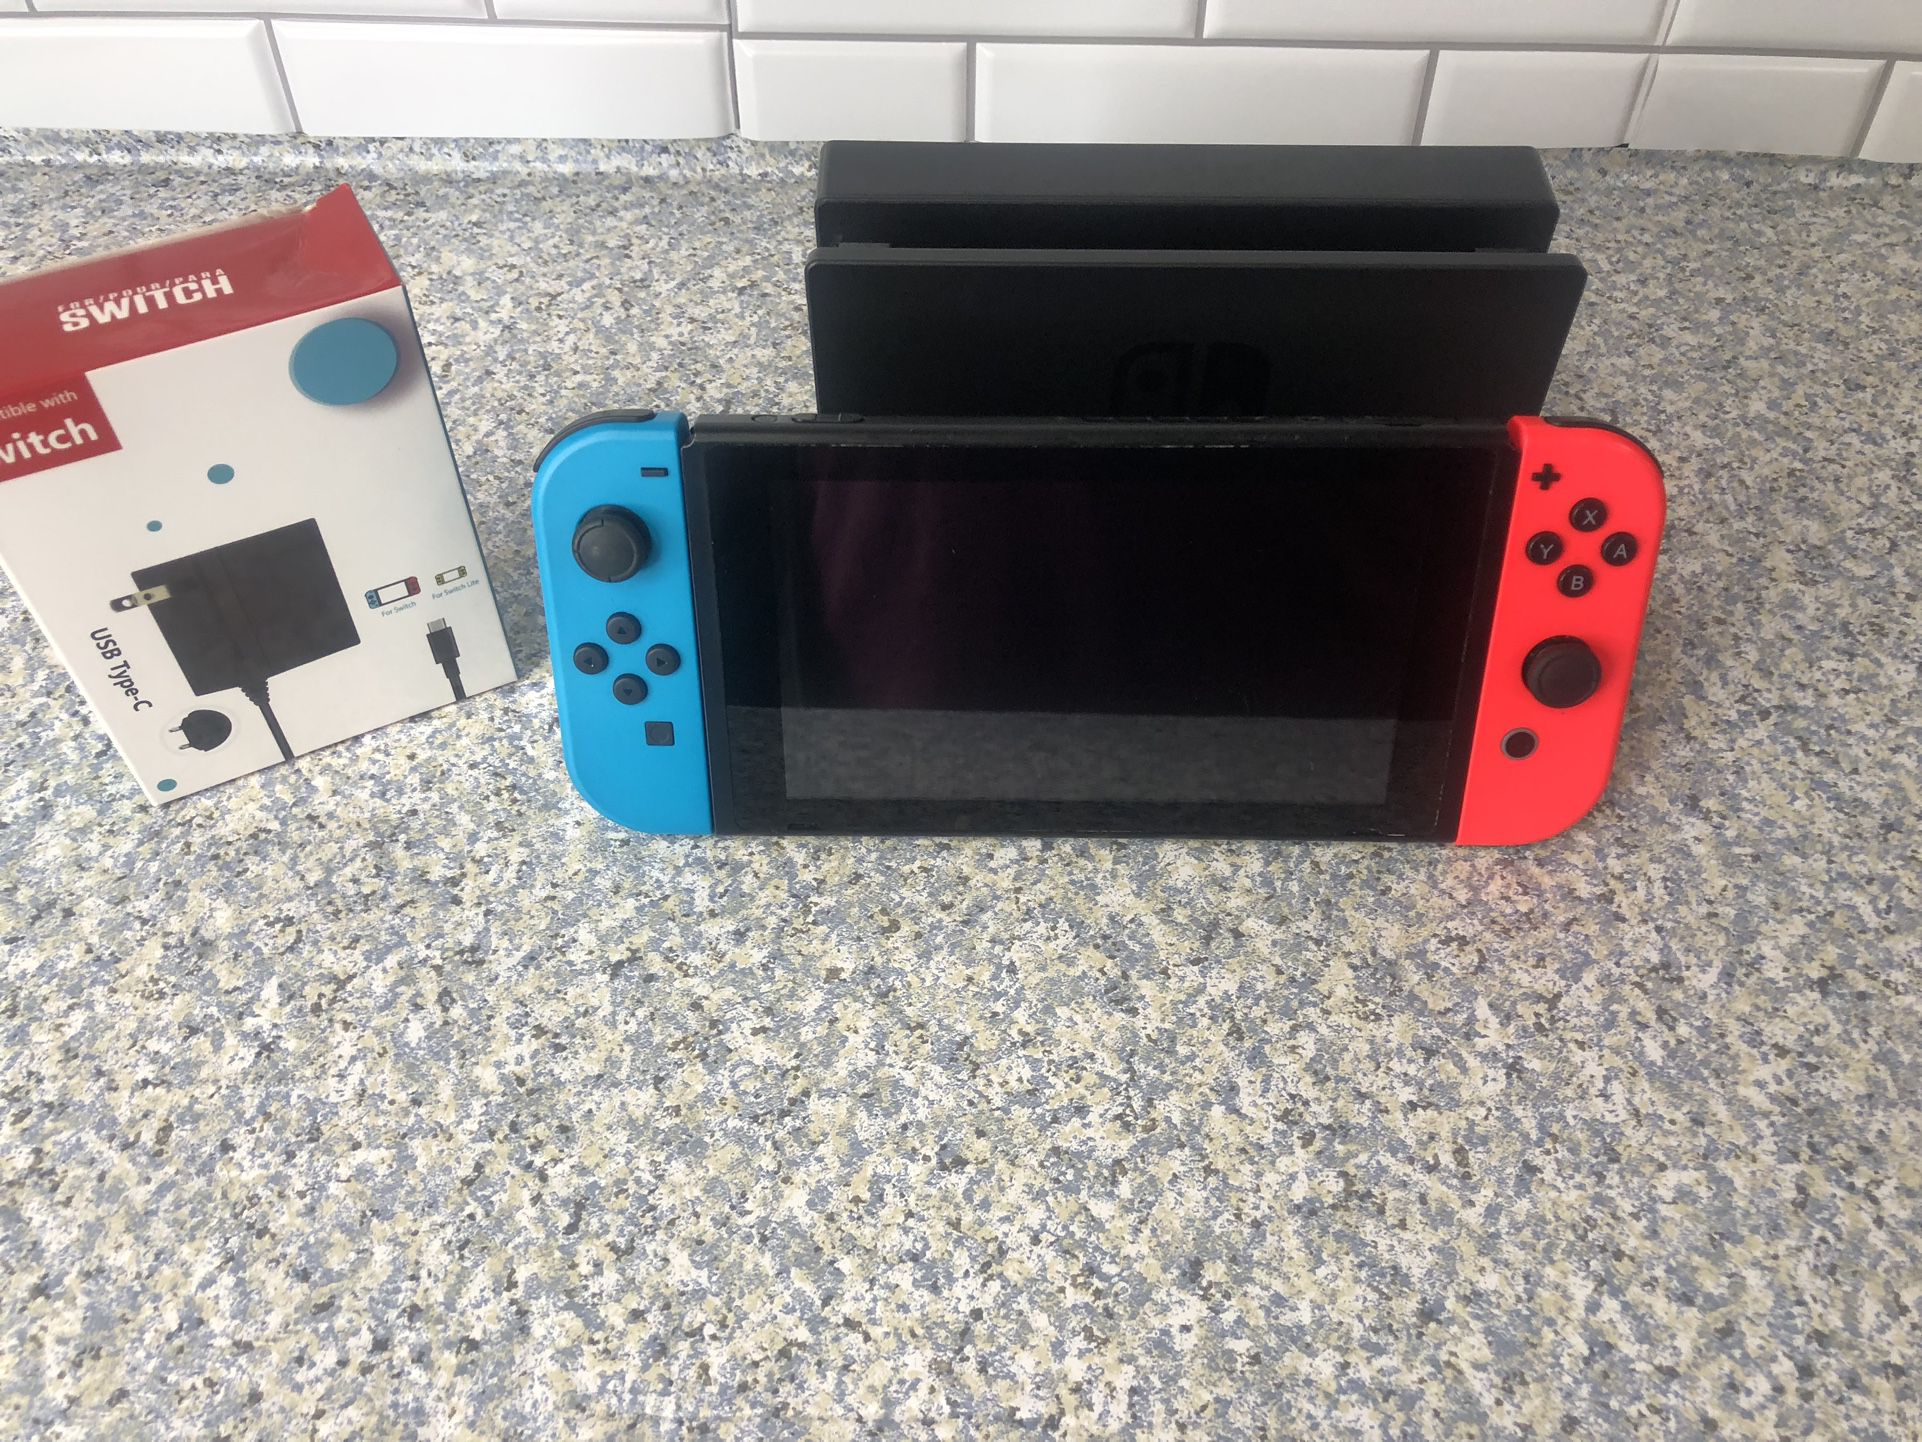 Nintendo Switch 32 gb with docking station no offers or trades please!!